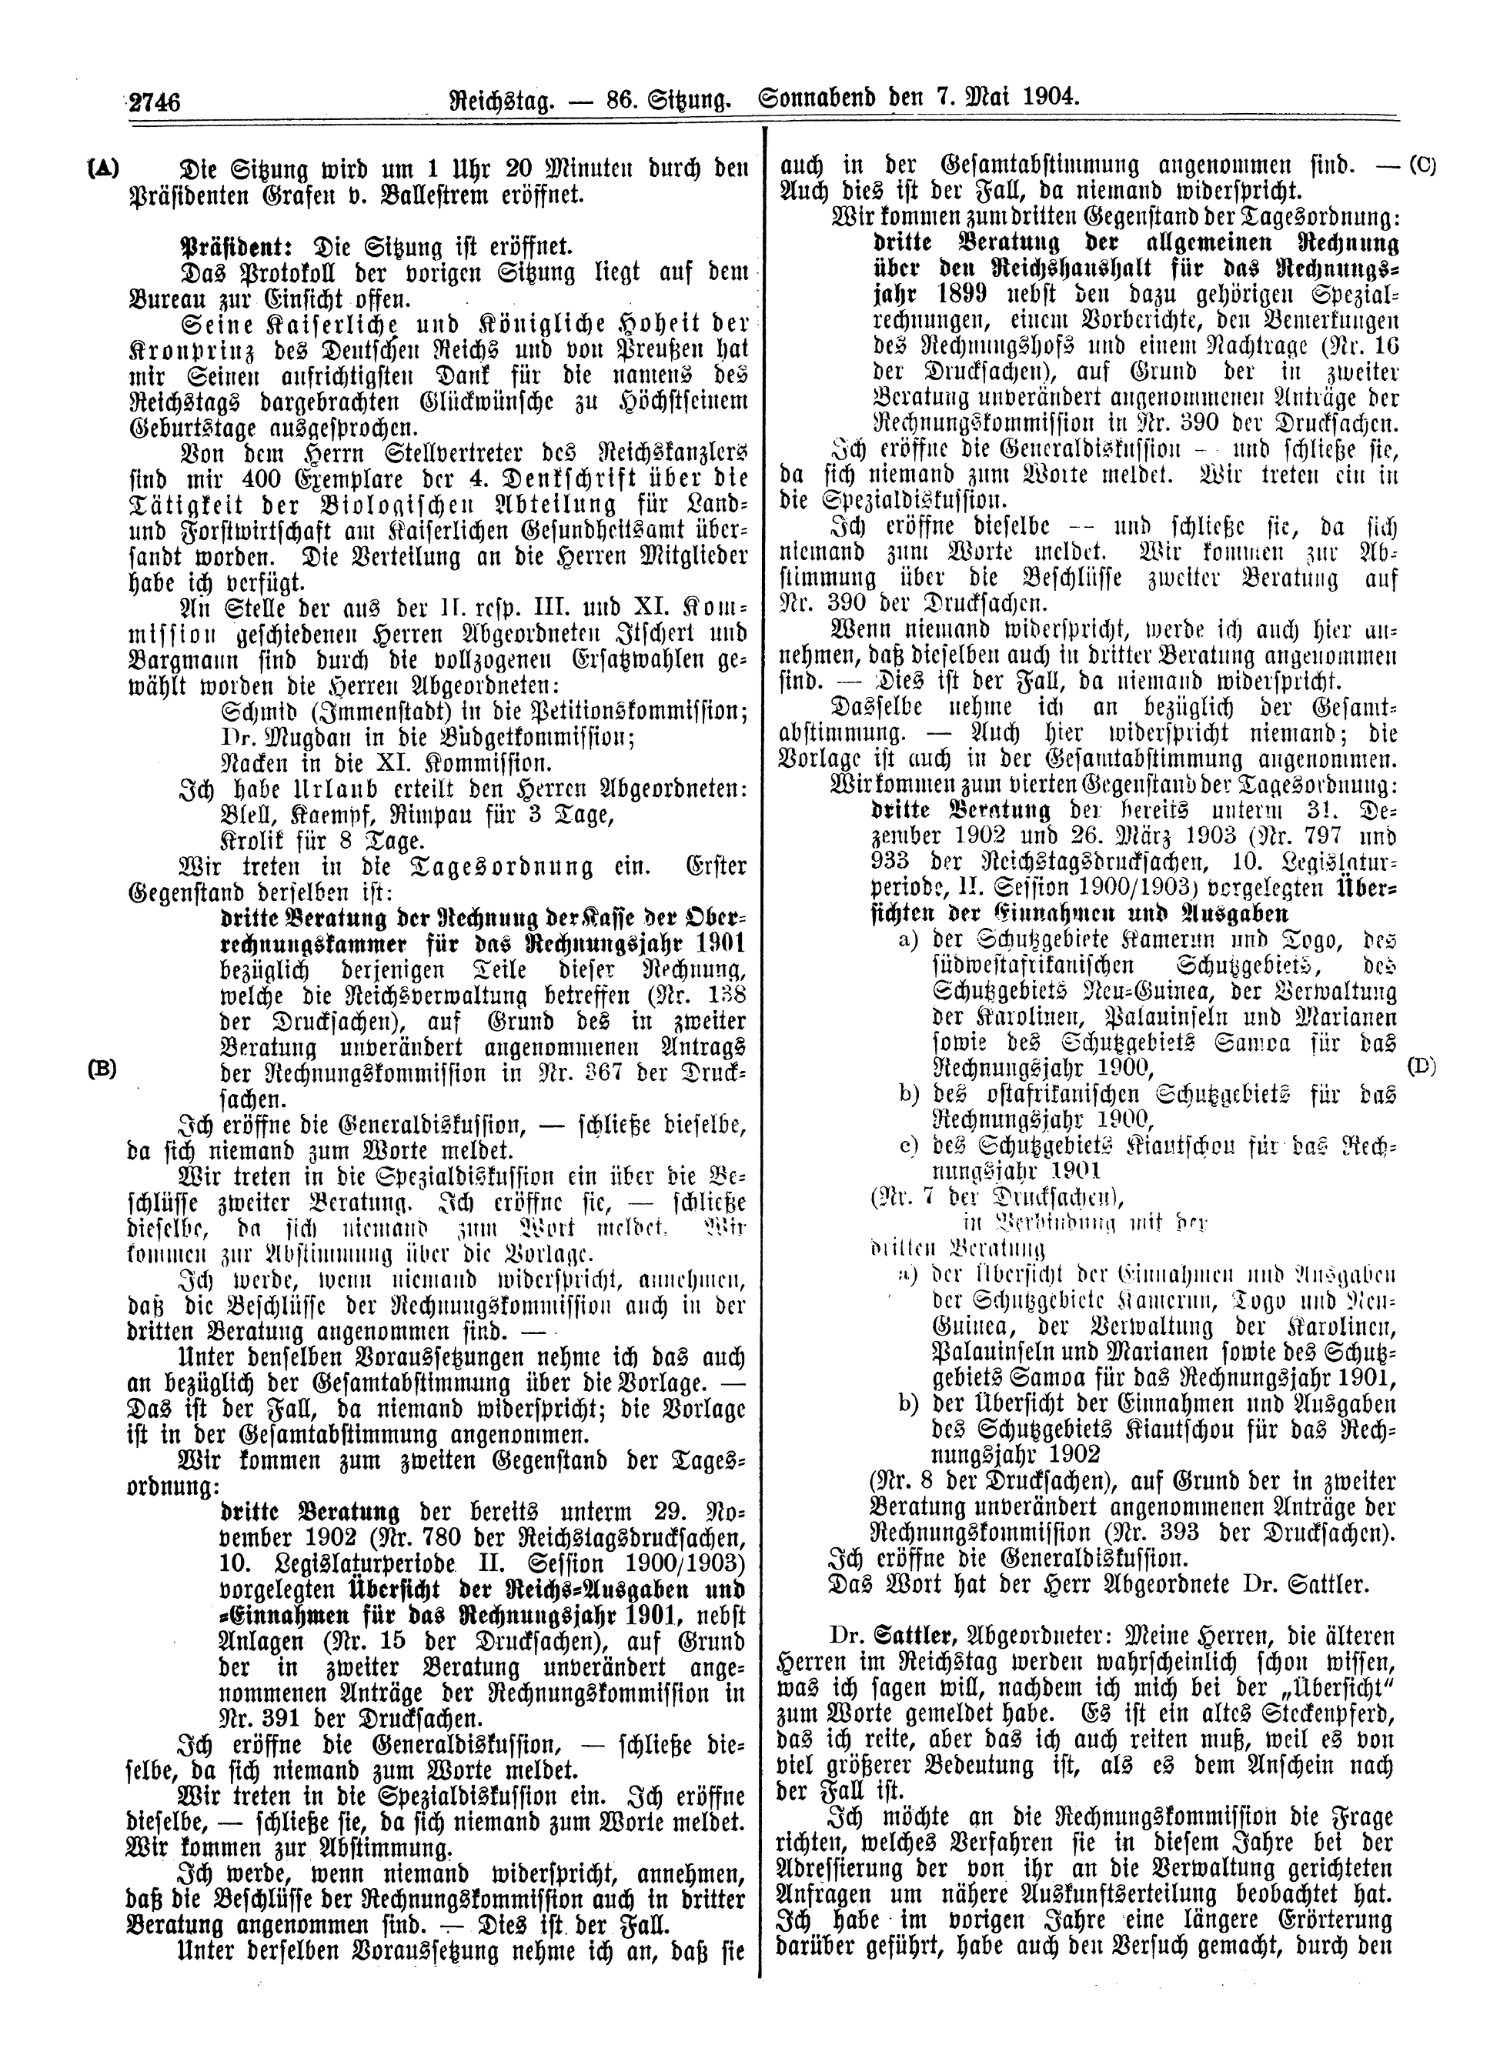 Scan of page 2746